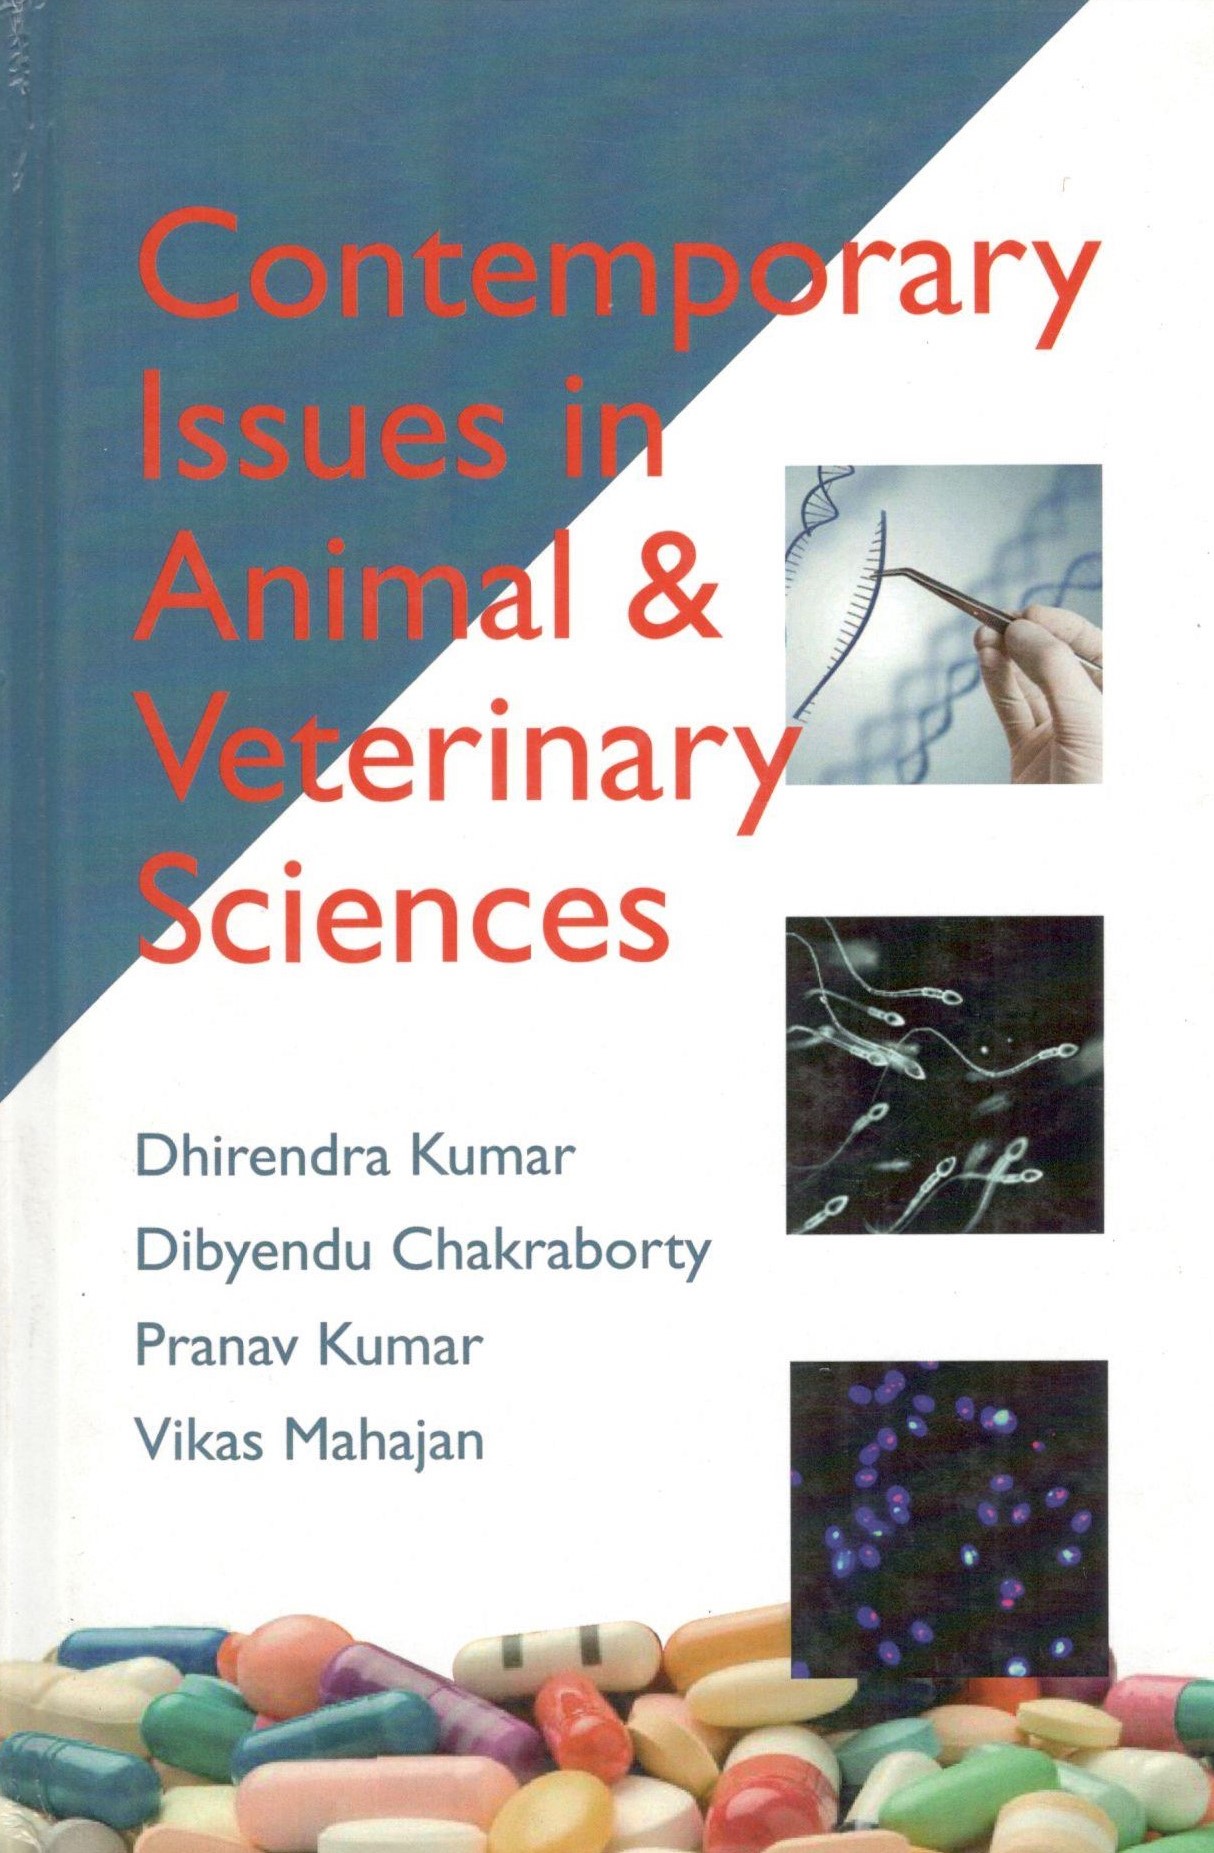 Contemporary Issues In Animal & Veterinary Sciences